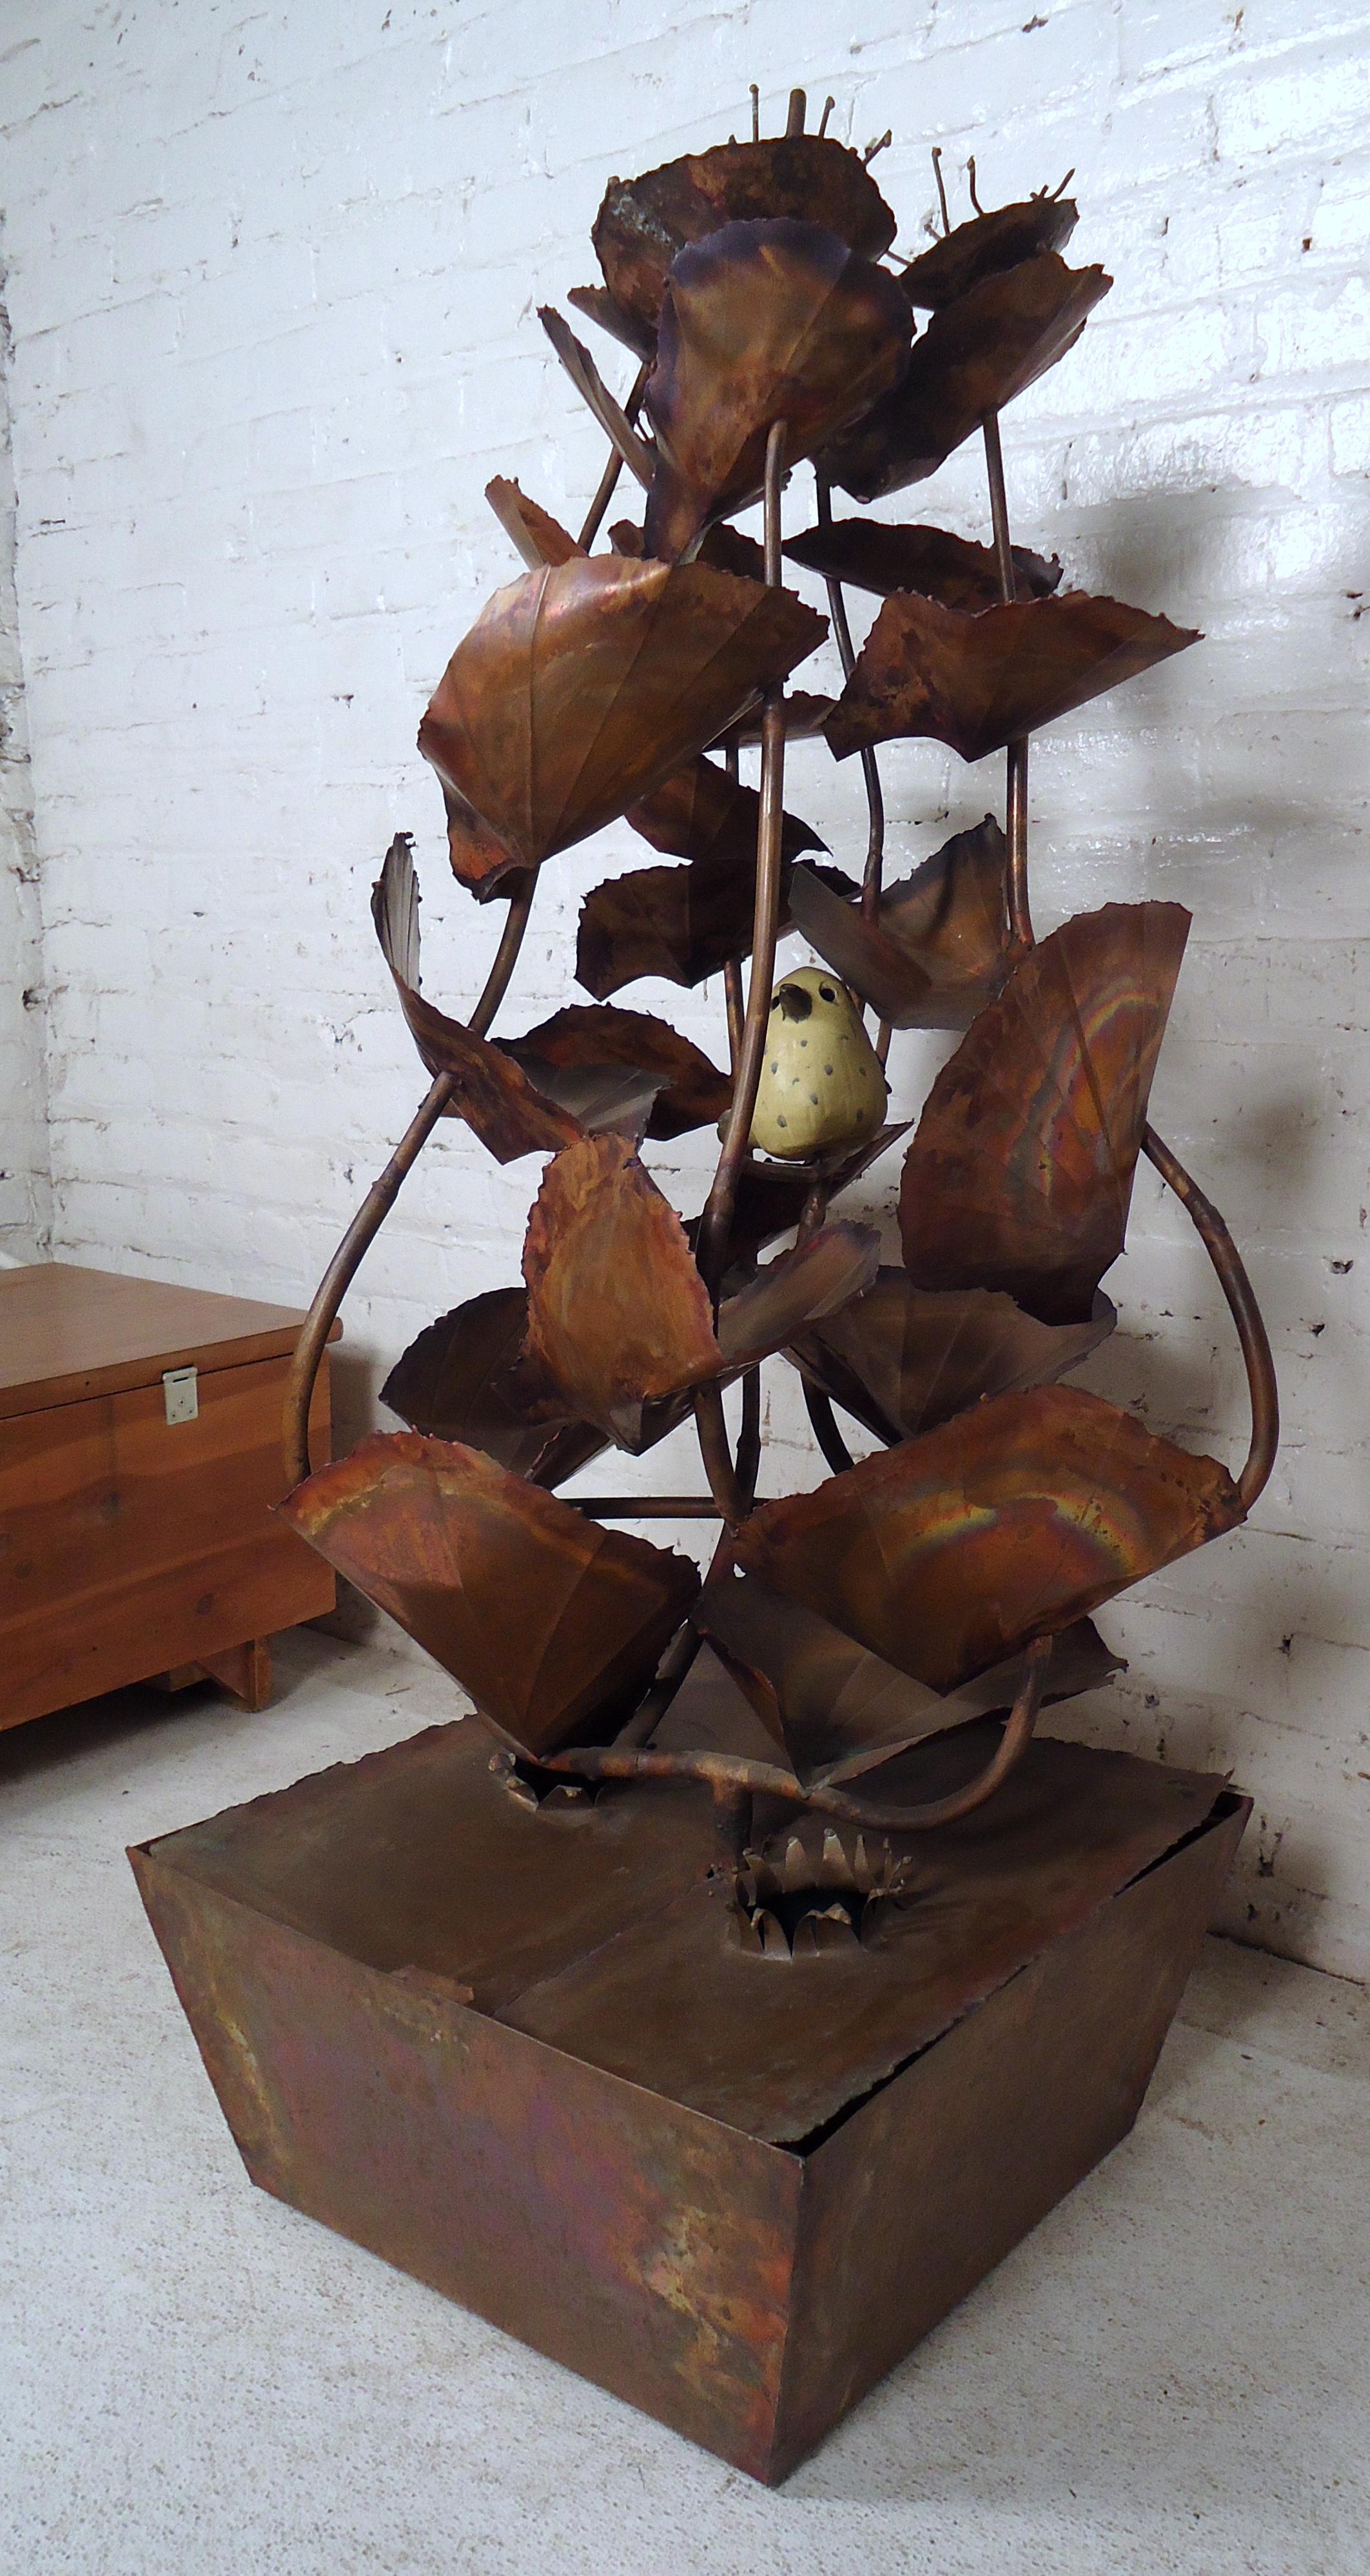 Vintage industrial copper torch cut water fountain, would make a great addition to any home.

(Please confirm item location - NY or NJ - with deale).